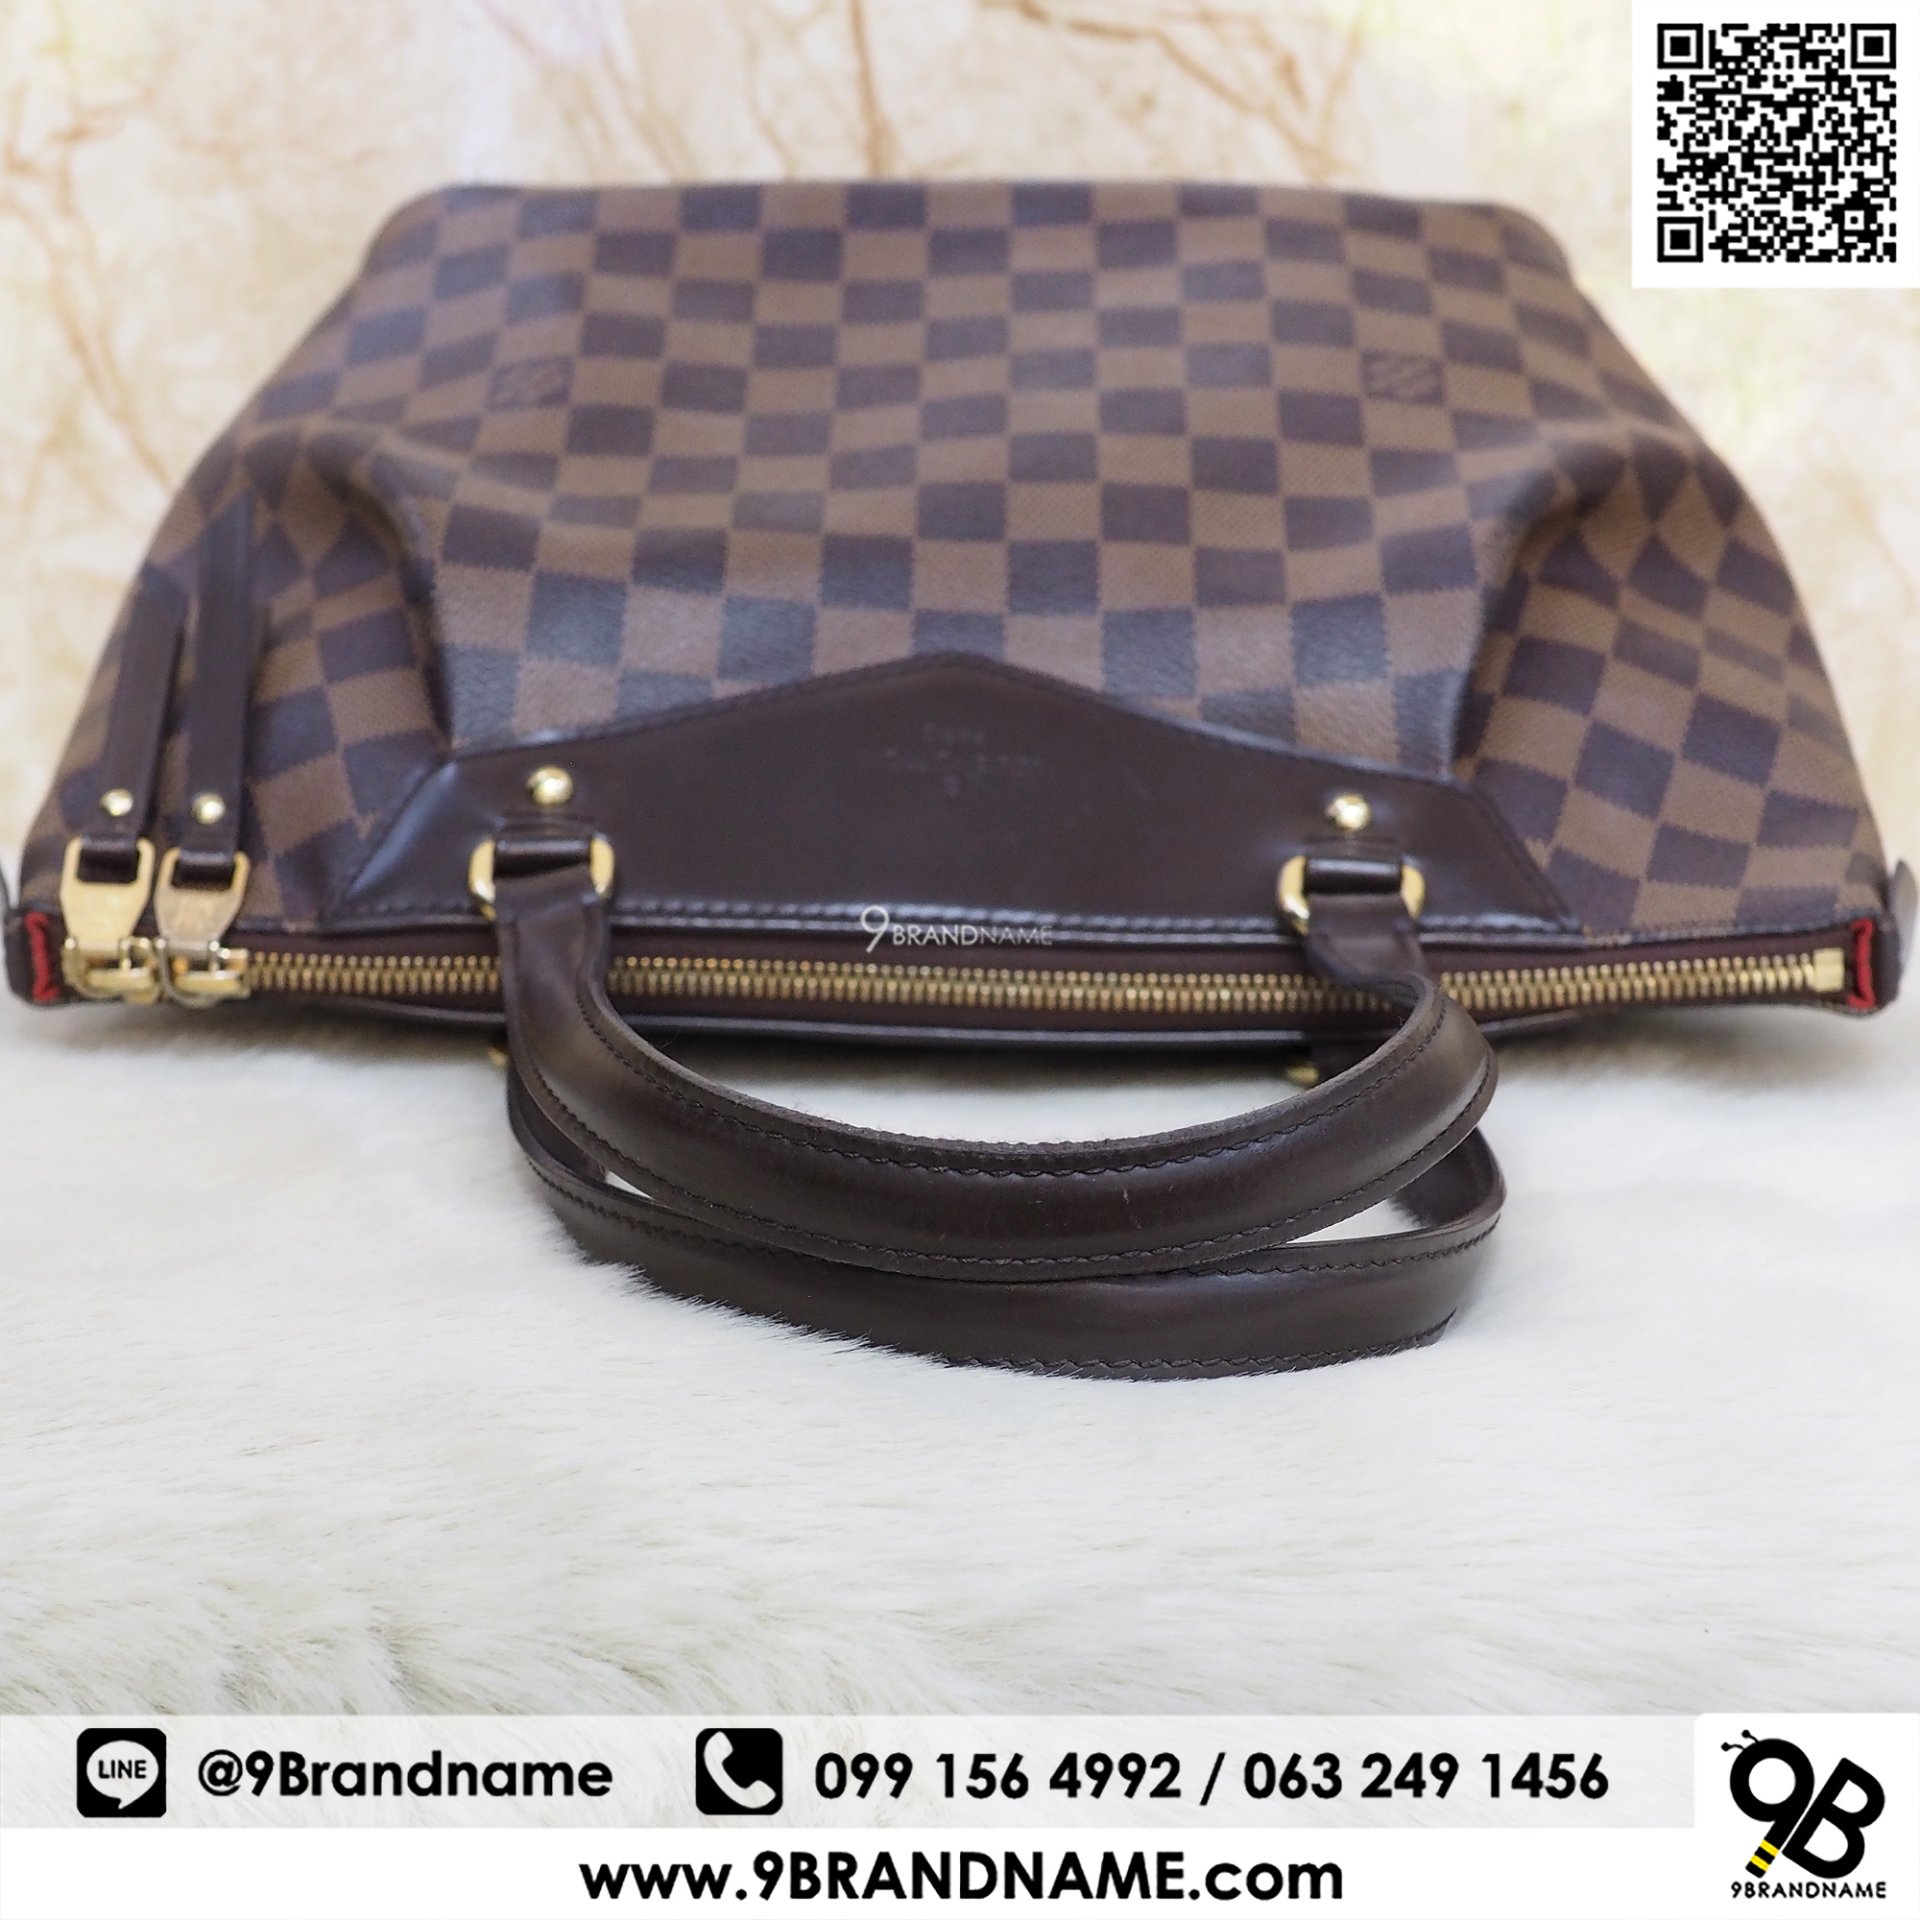 Louis Vuitton Westminster PM Damier Ebene - Used Authentic Bag - 9brandname